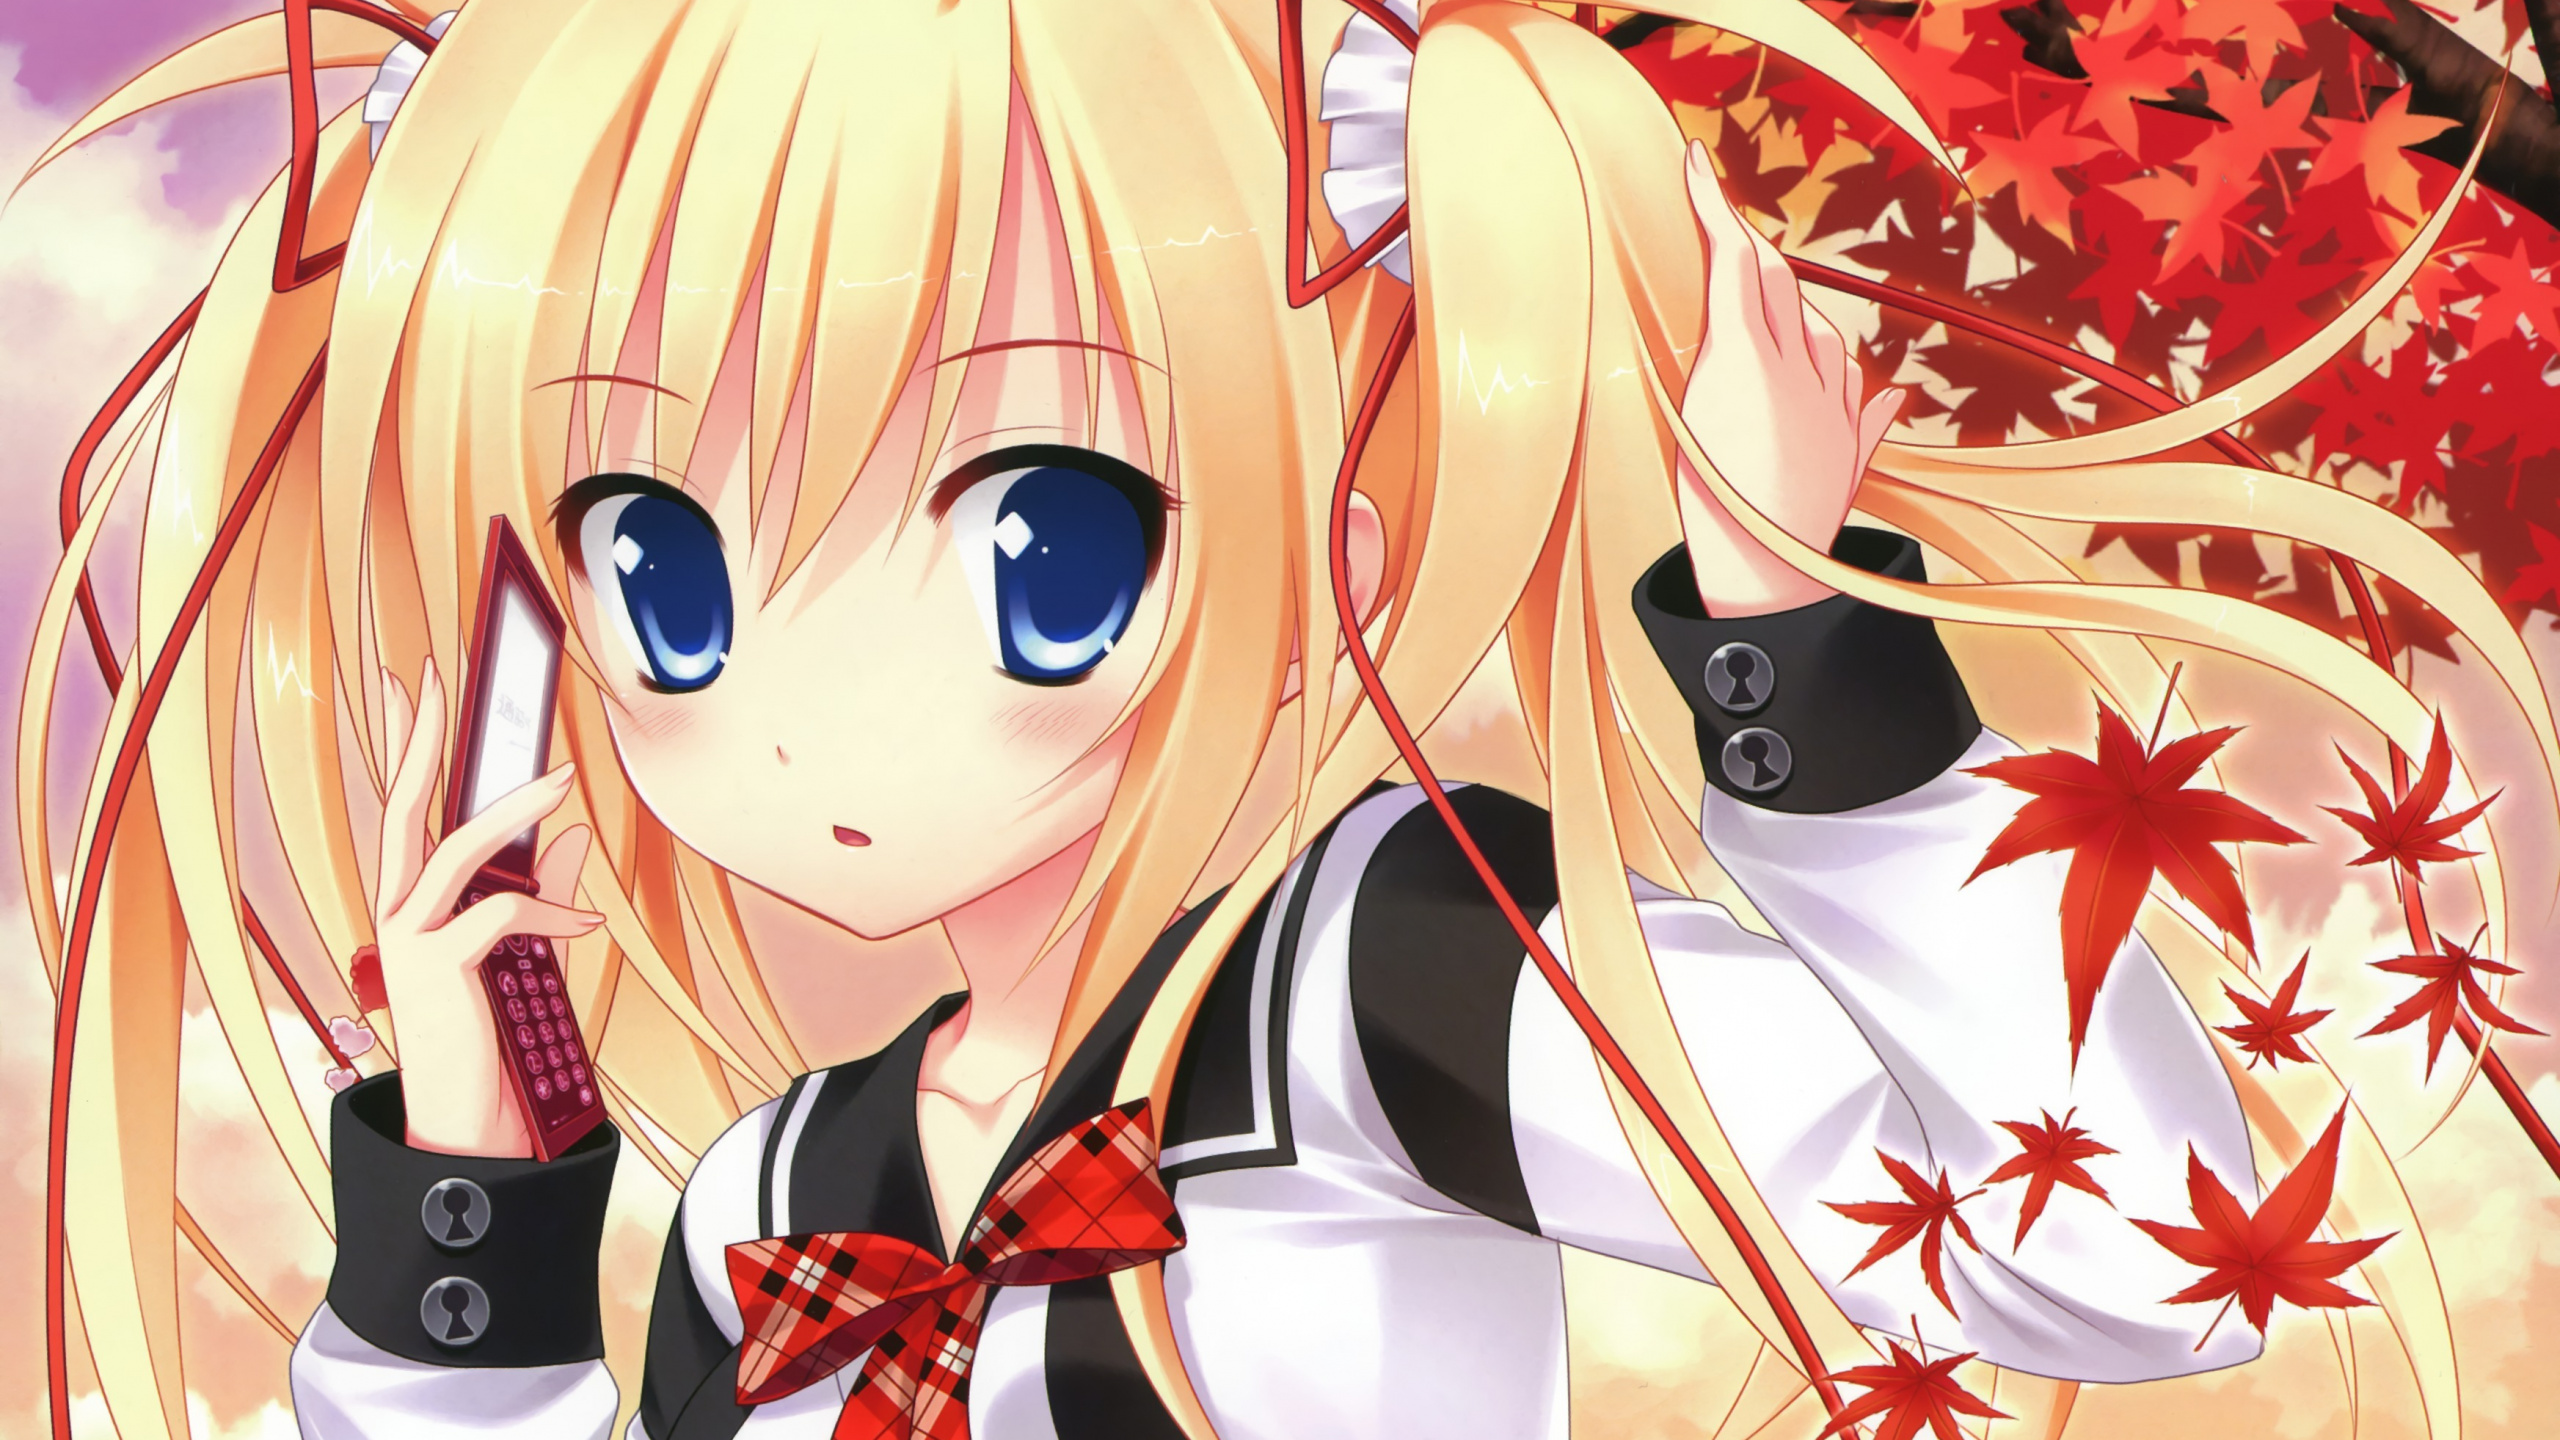 Blonde Haired Girl Anime Character. Wallpaper in 2560x1440 Resolution